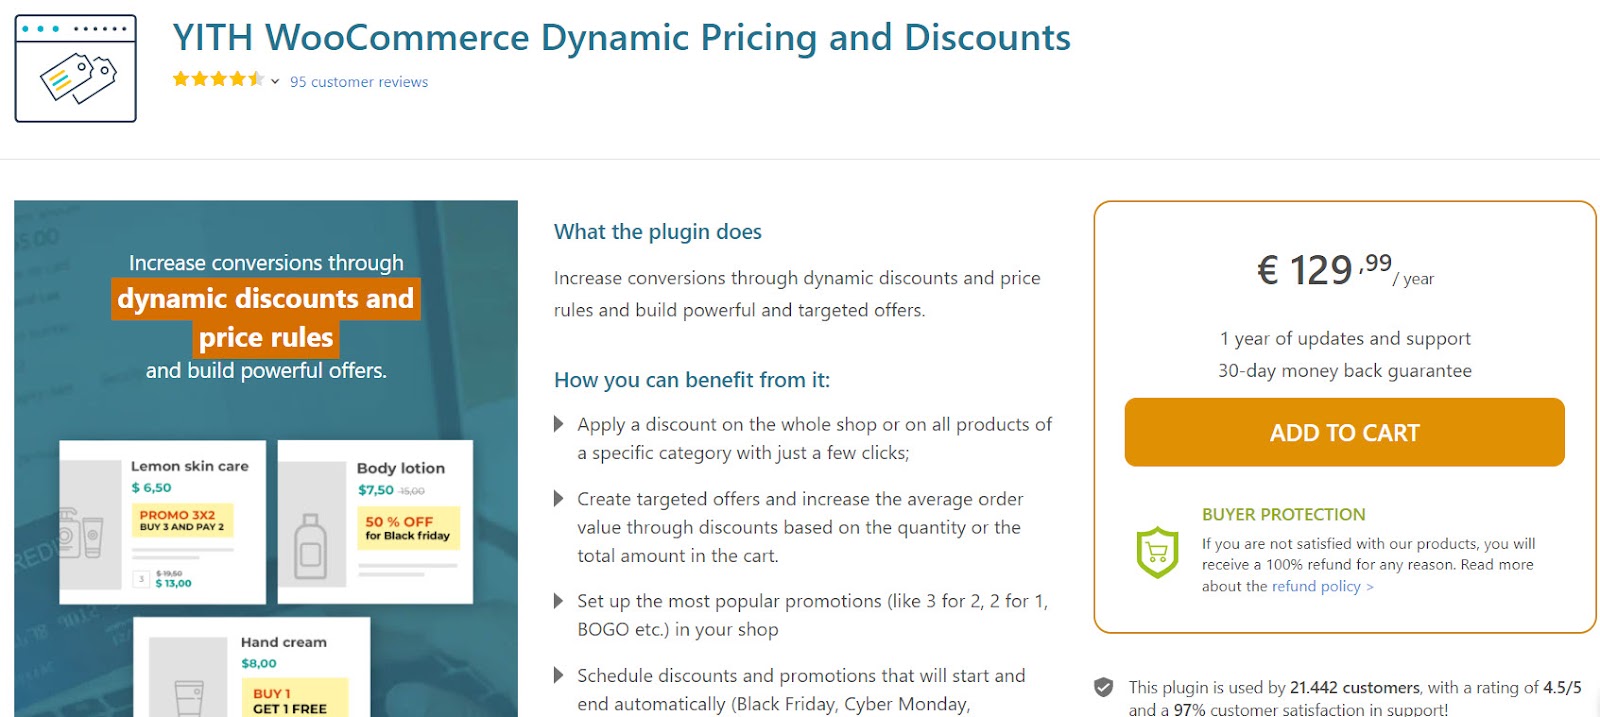 yith woocommerce dynamic pricing and discounts 